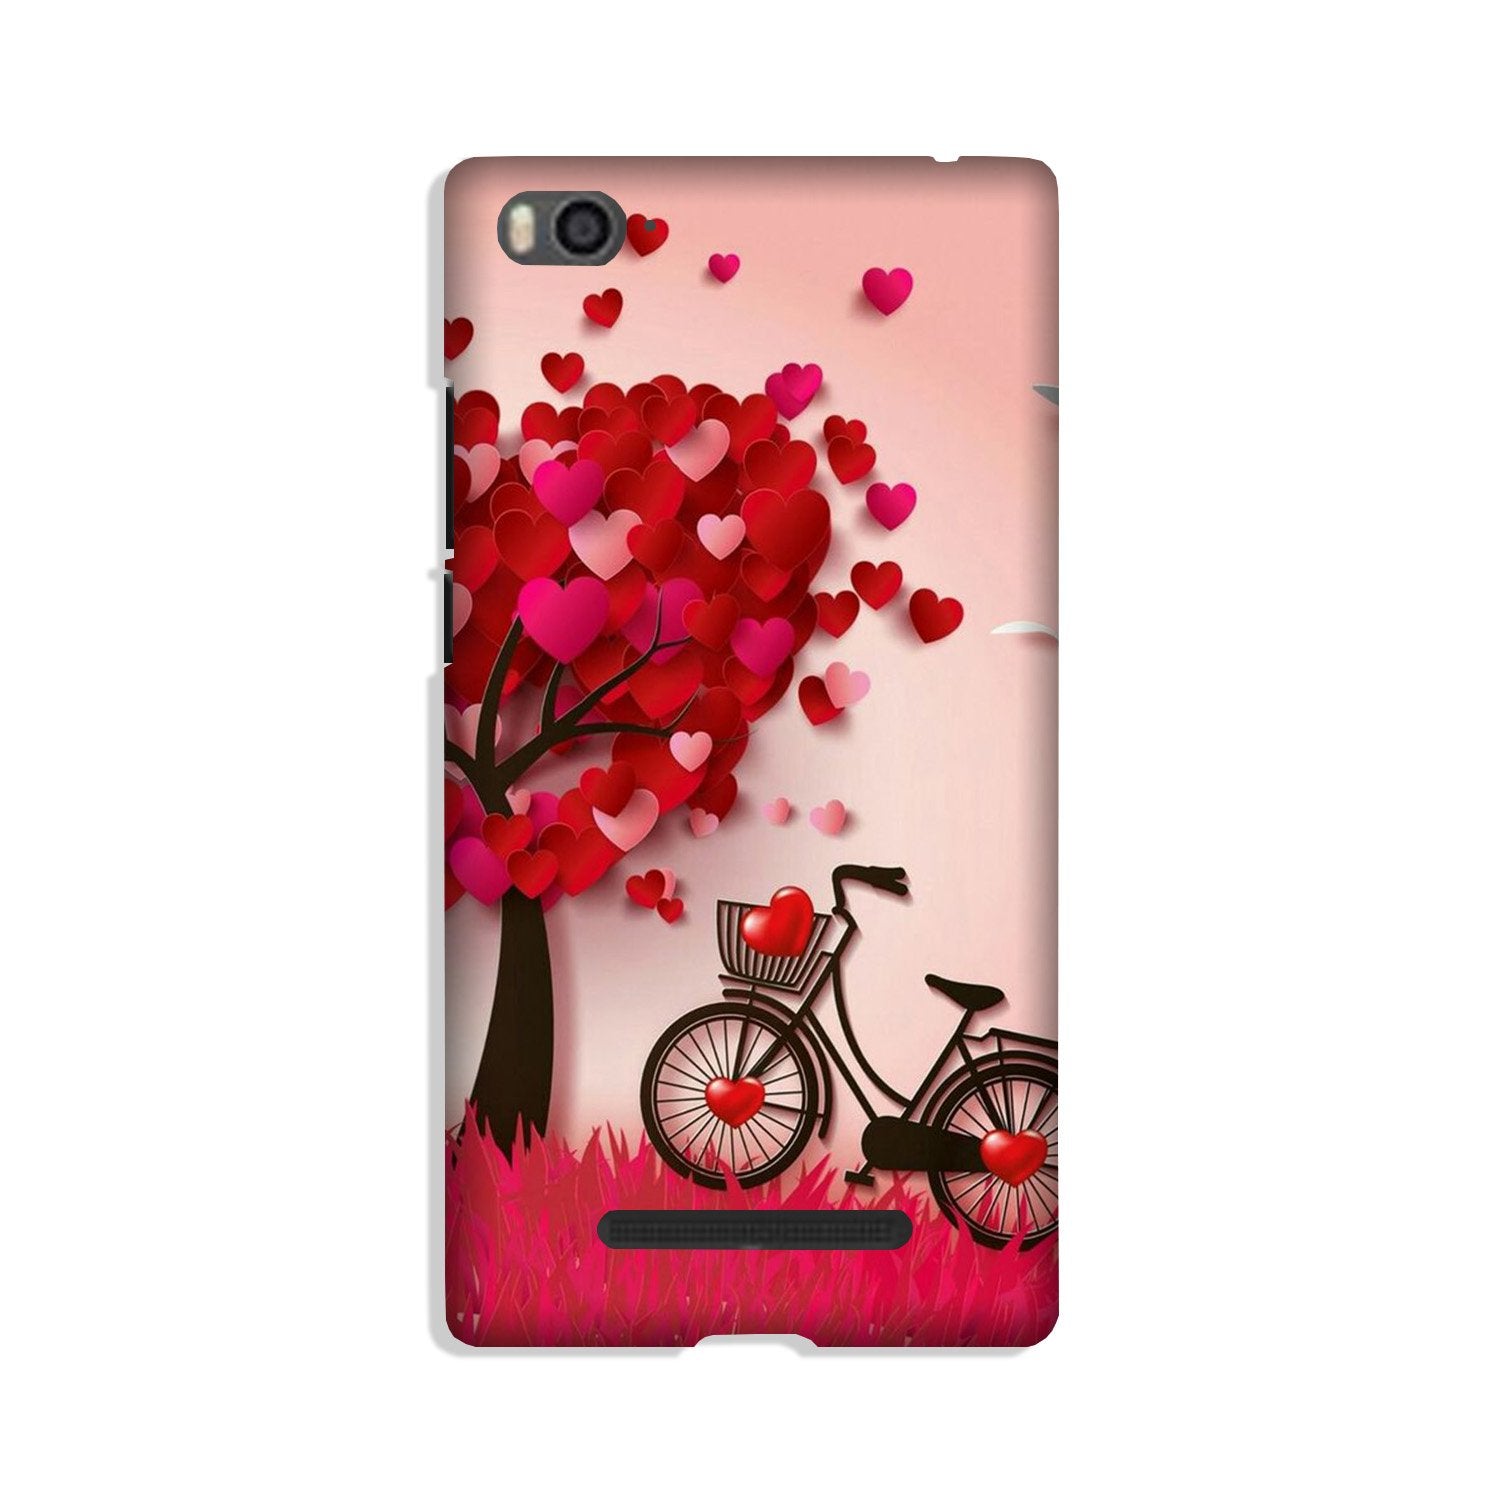 Red Heart Cycle Case for Xiaomi Mi 4i (Design No. 222)